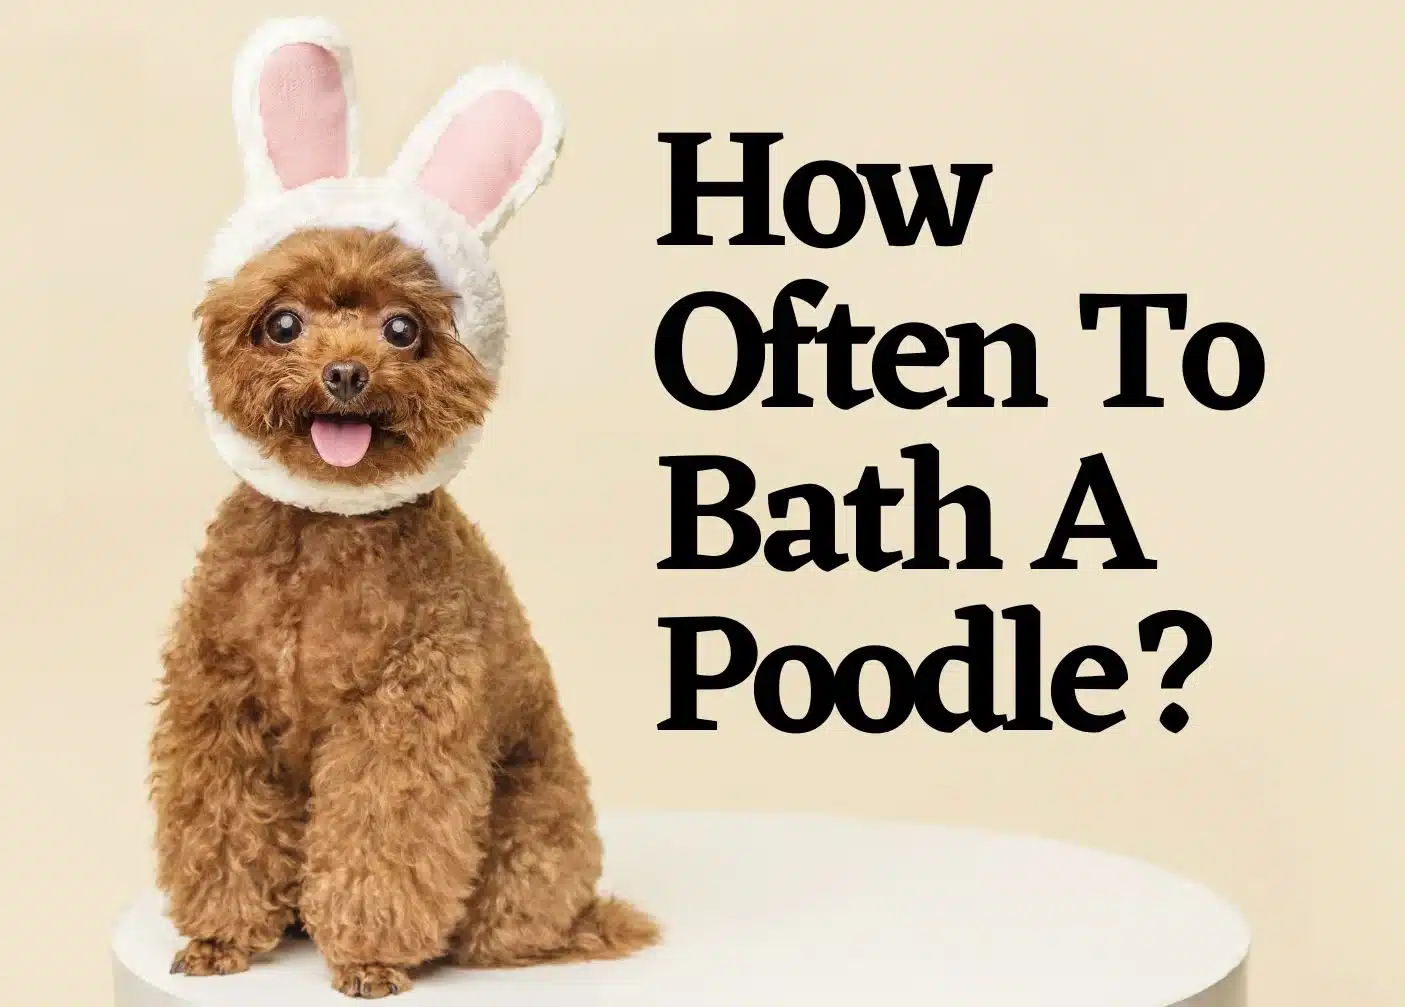 How often to bath a poodle | a standing on a stool wearing white headband